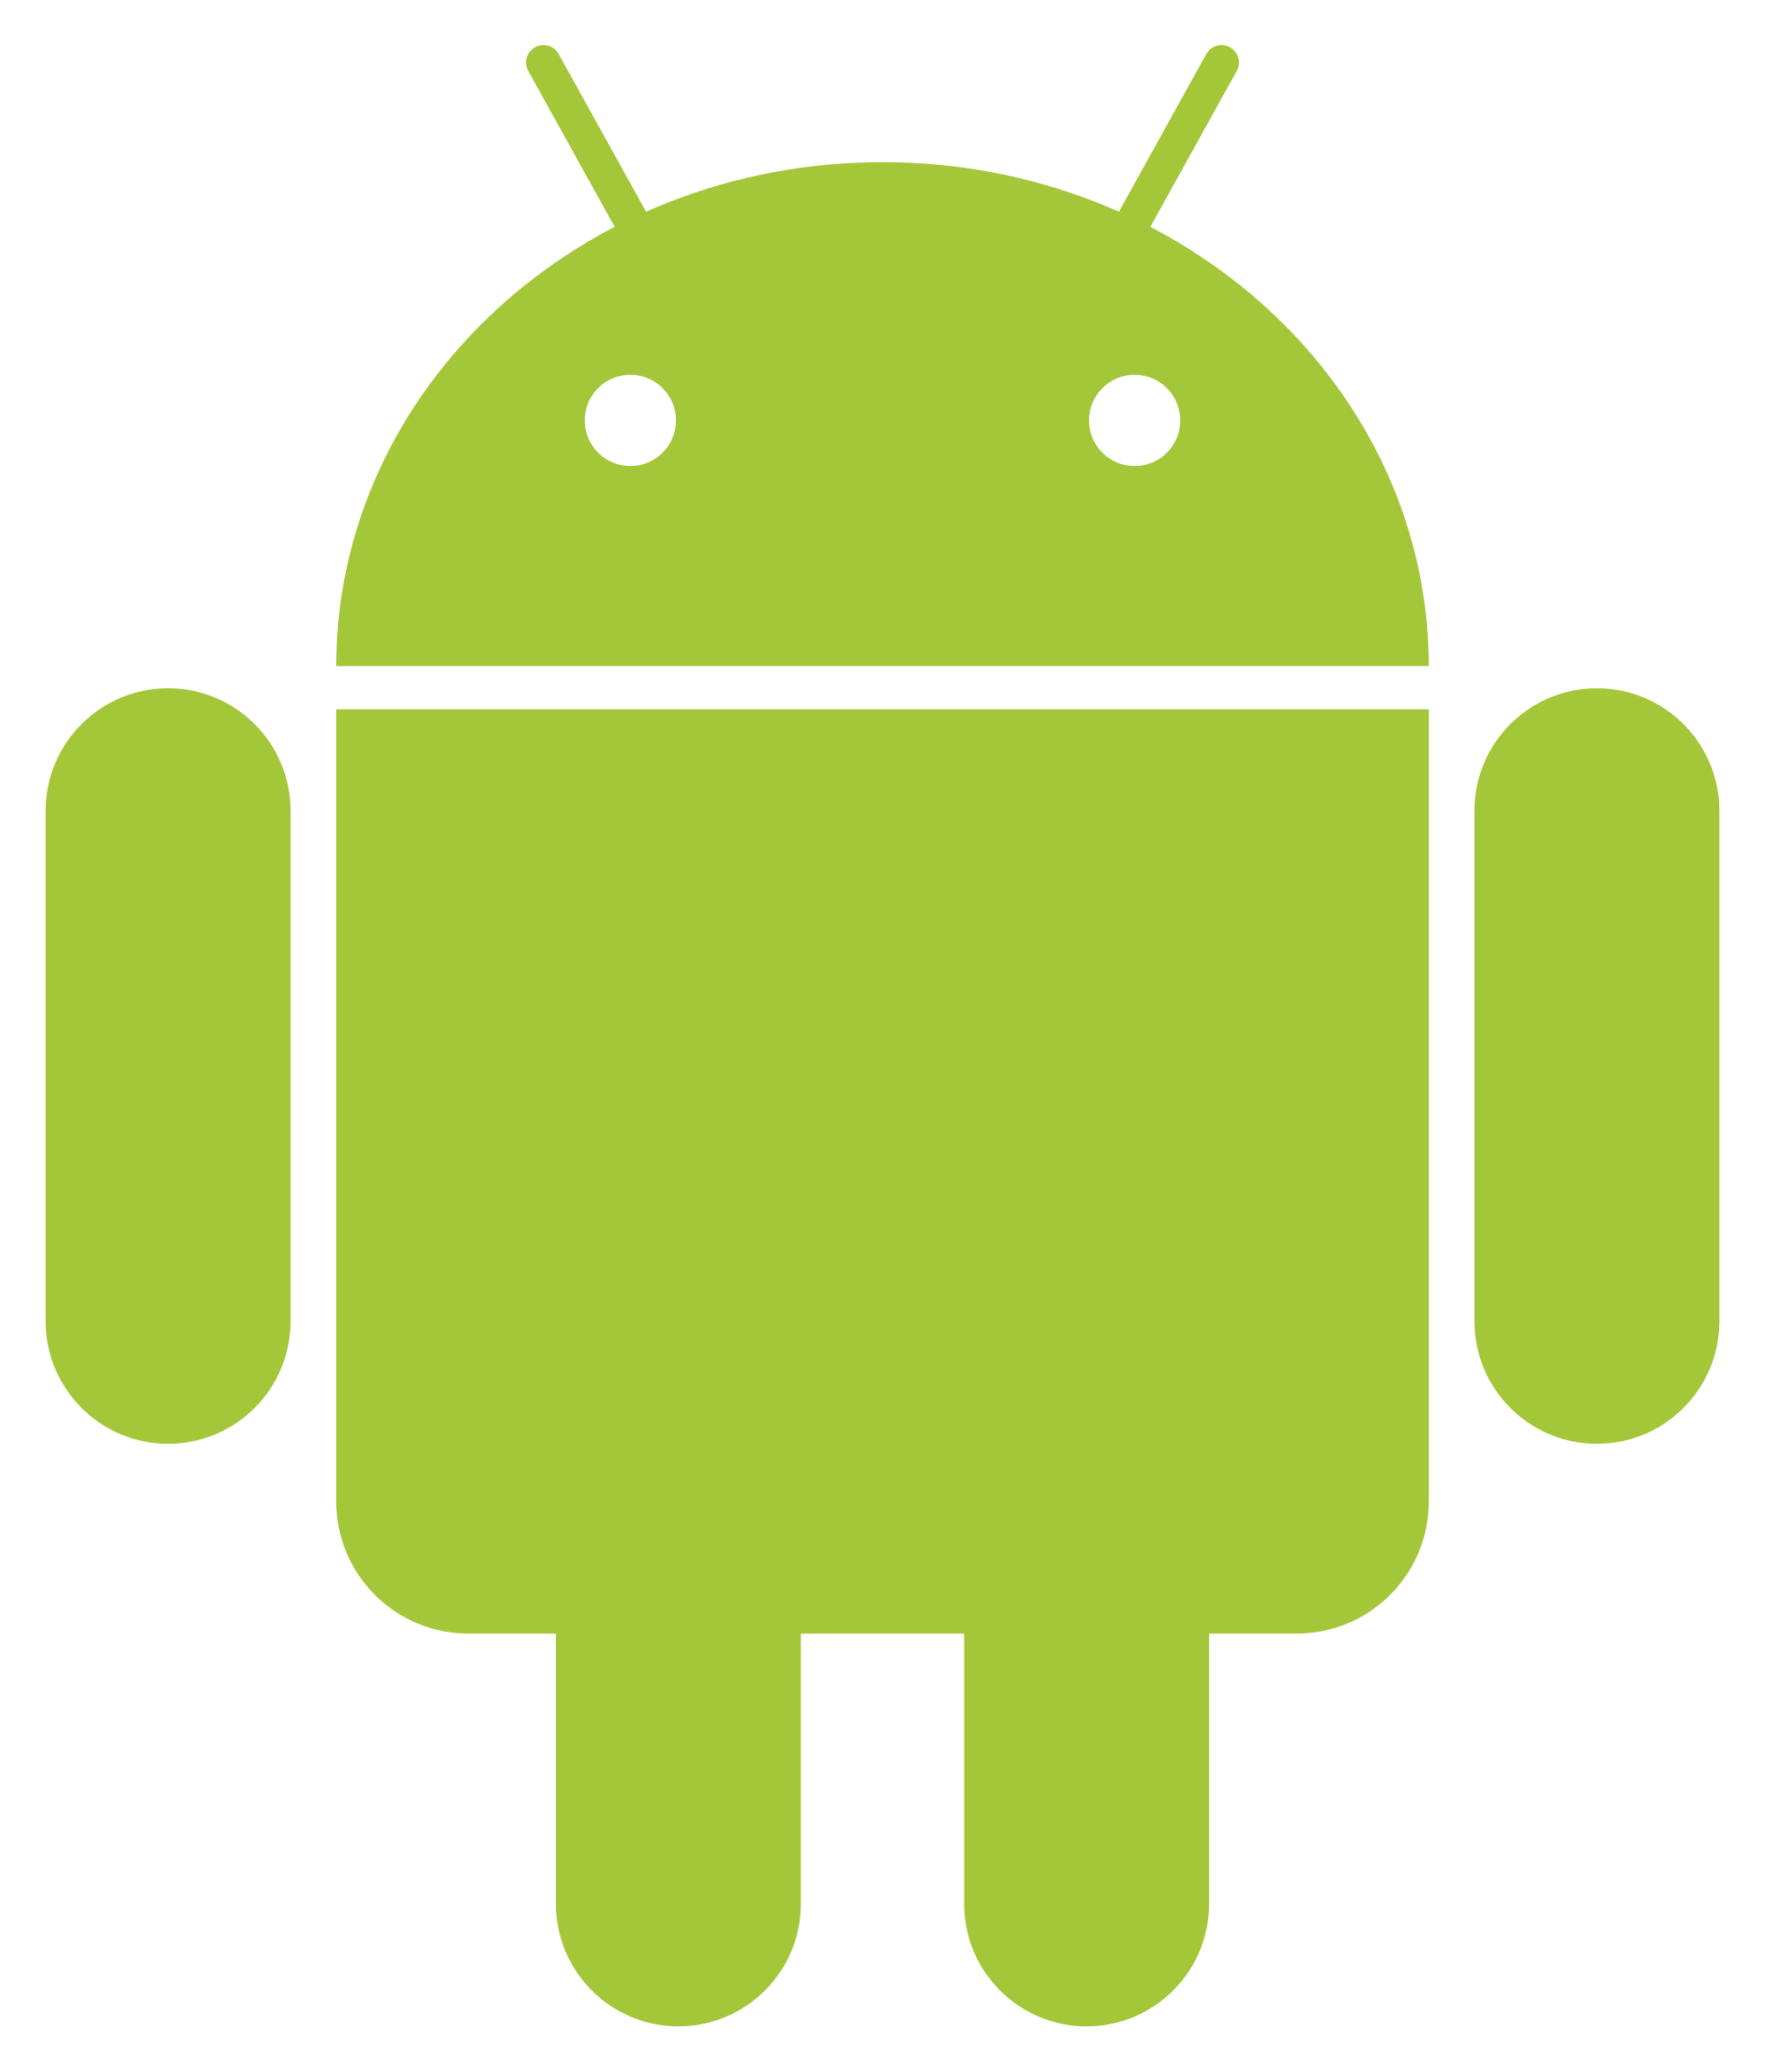 Android_robot